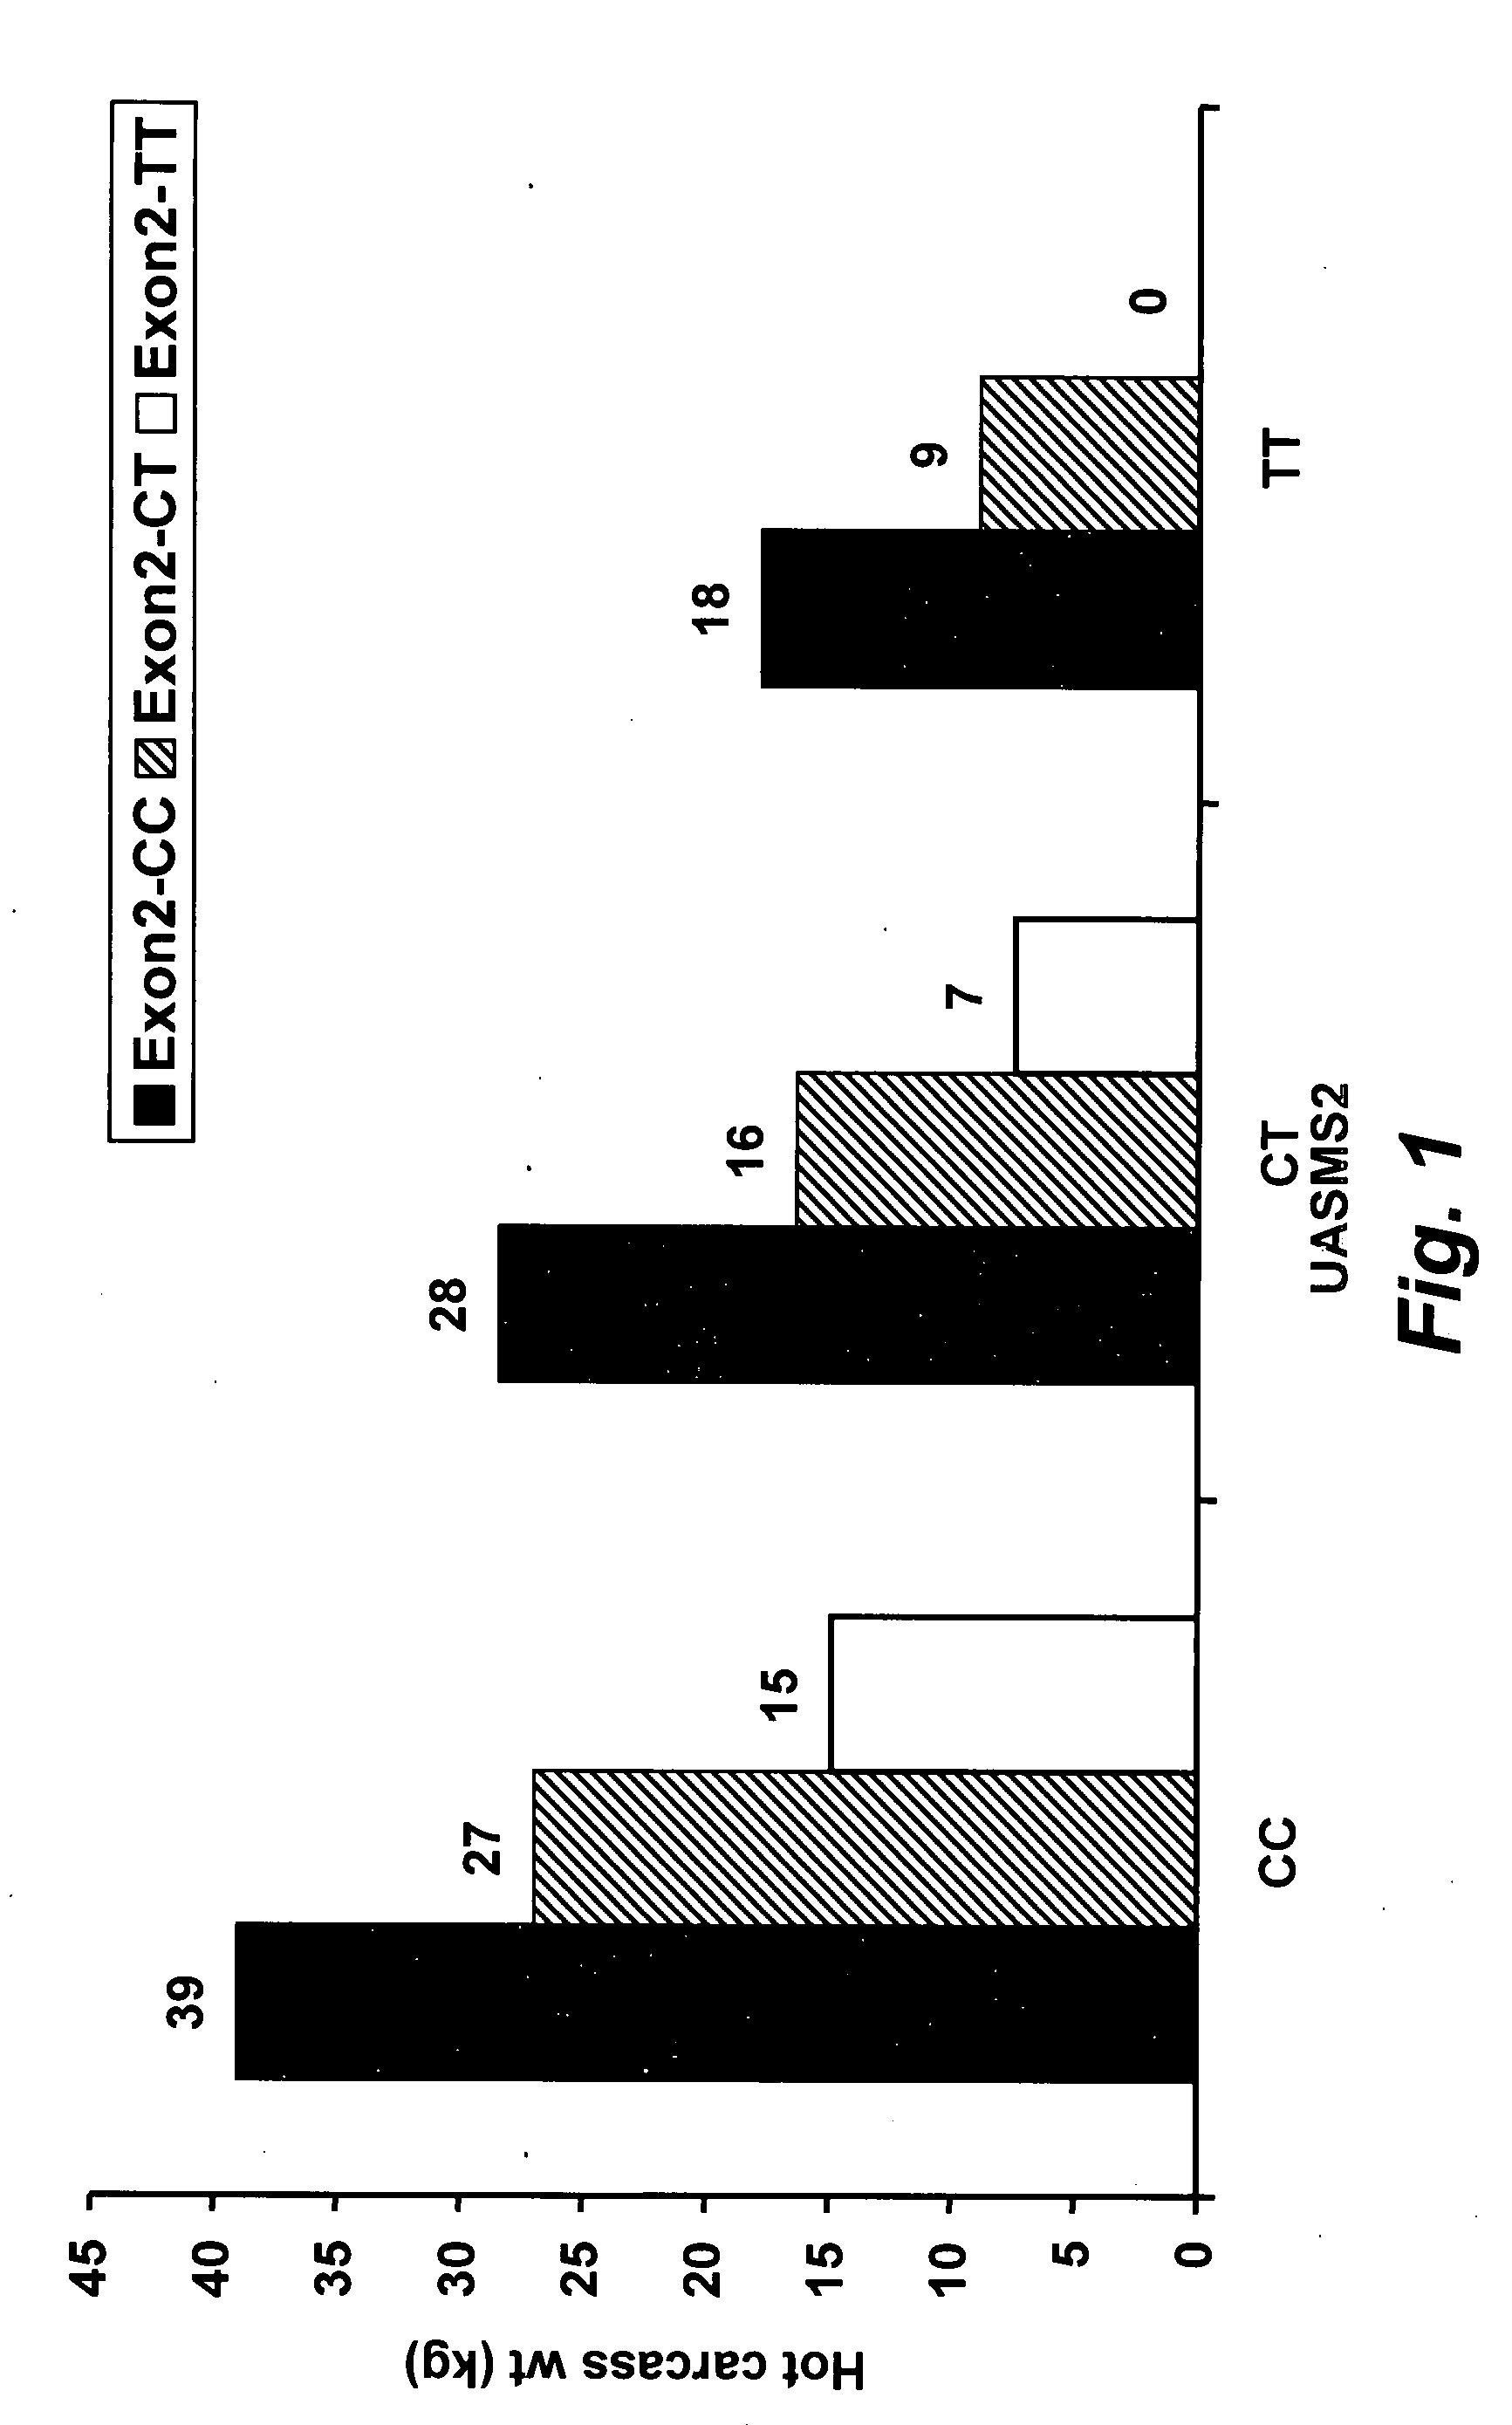 Systems and methods for predicting a livestock marketing method